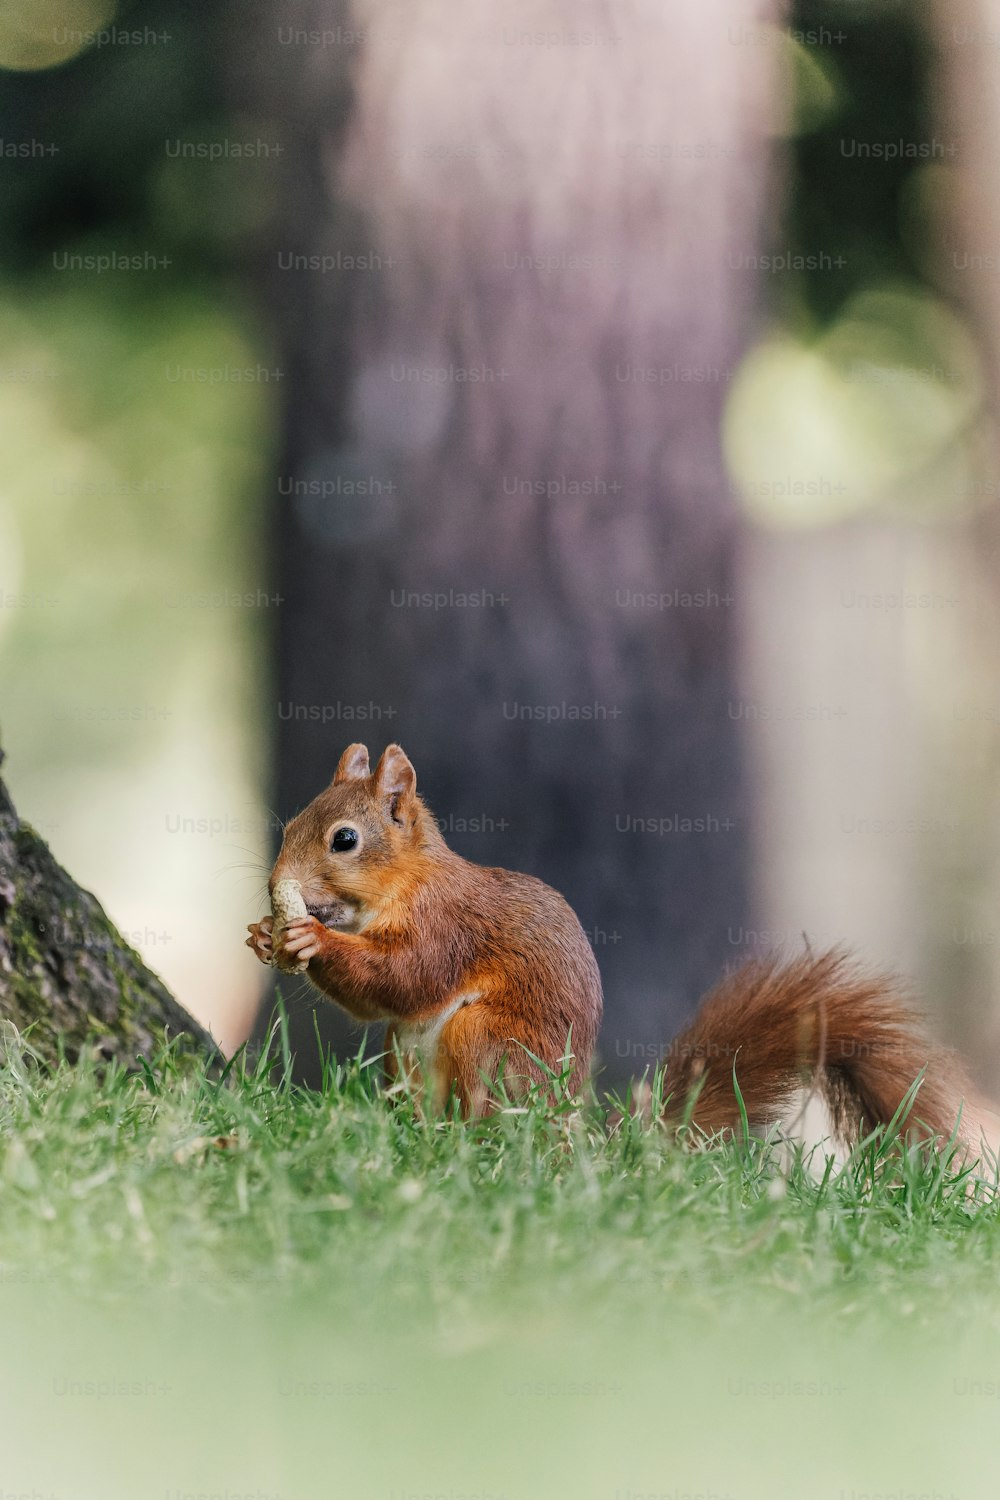 a squirrel eating a piece of food next to a tree